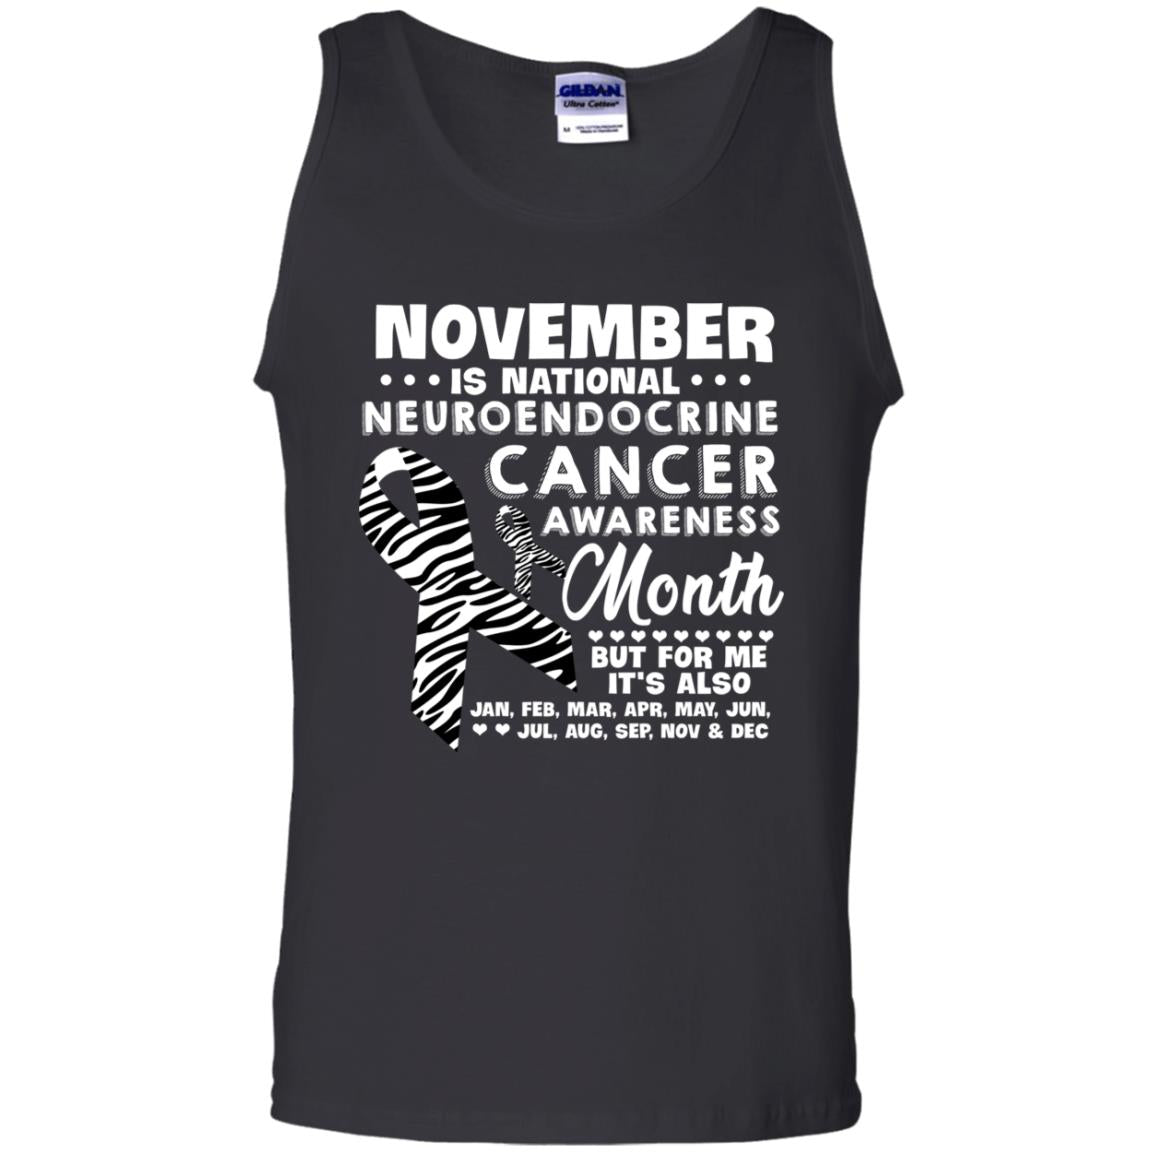 November Is National Neuroendocrine Cancer Awareness Month But For Me It's Also 12 Months ShirtG220 Gildan 100% Cotton Tank Top